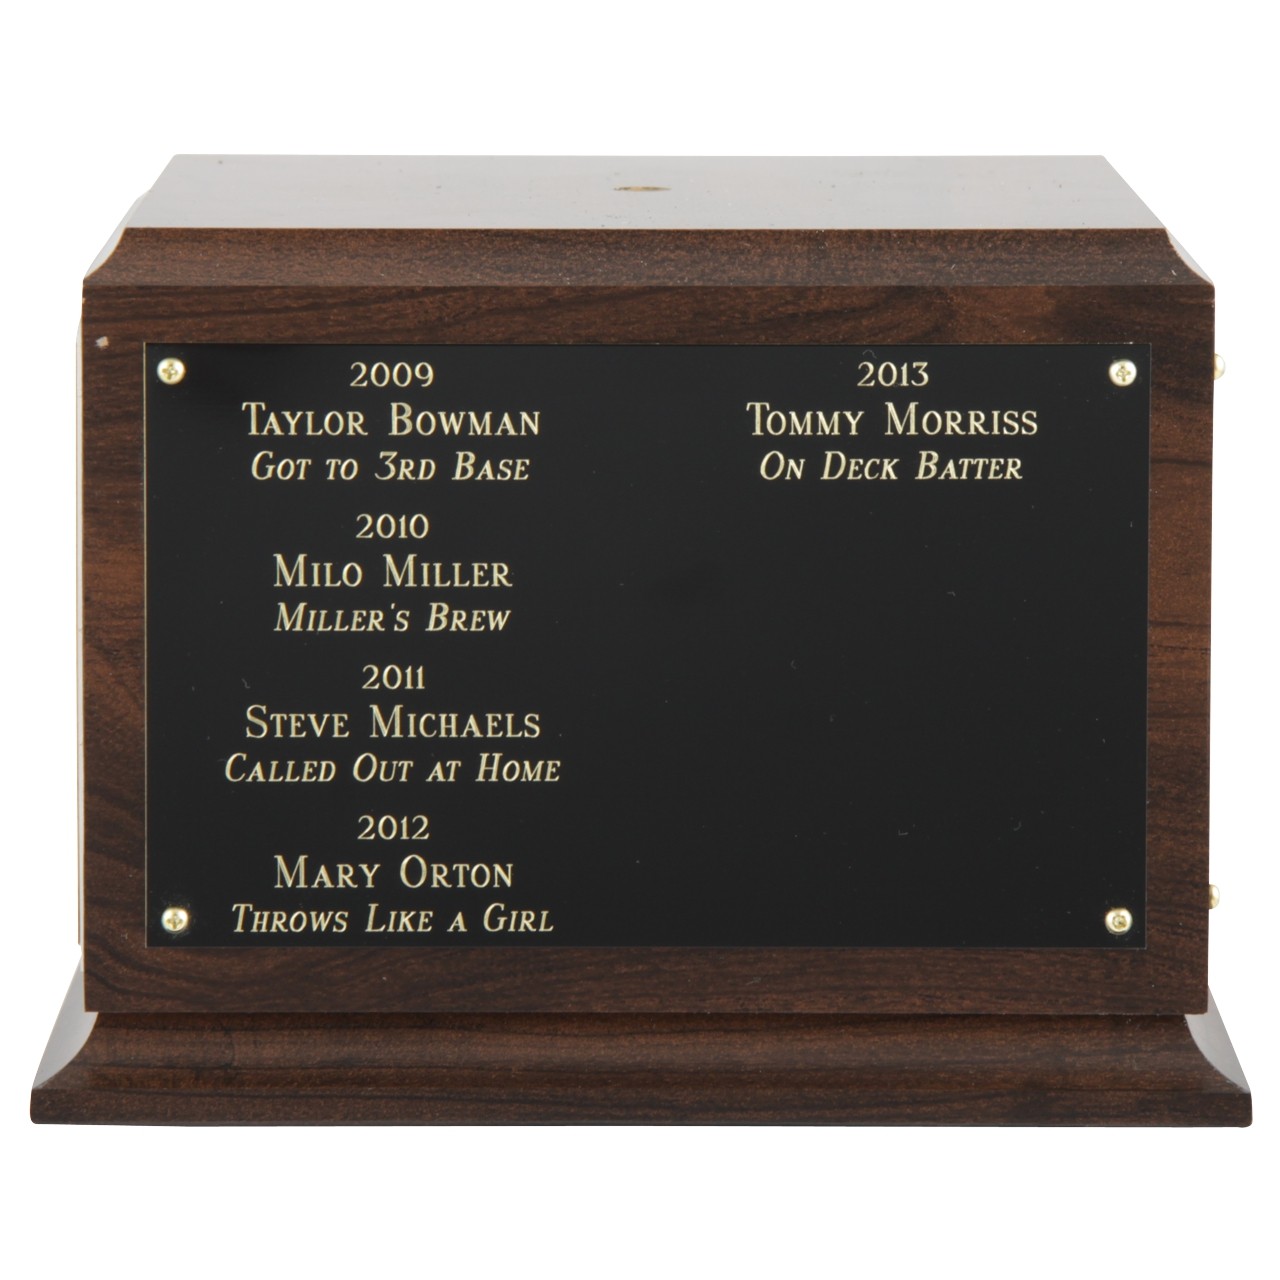 Wood Award Trophy Base Display 10"x 10"x 4.75" Cherry Color Stain 